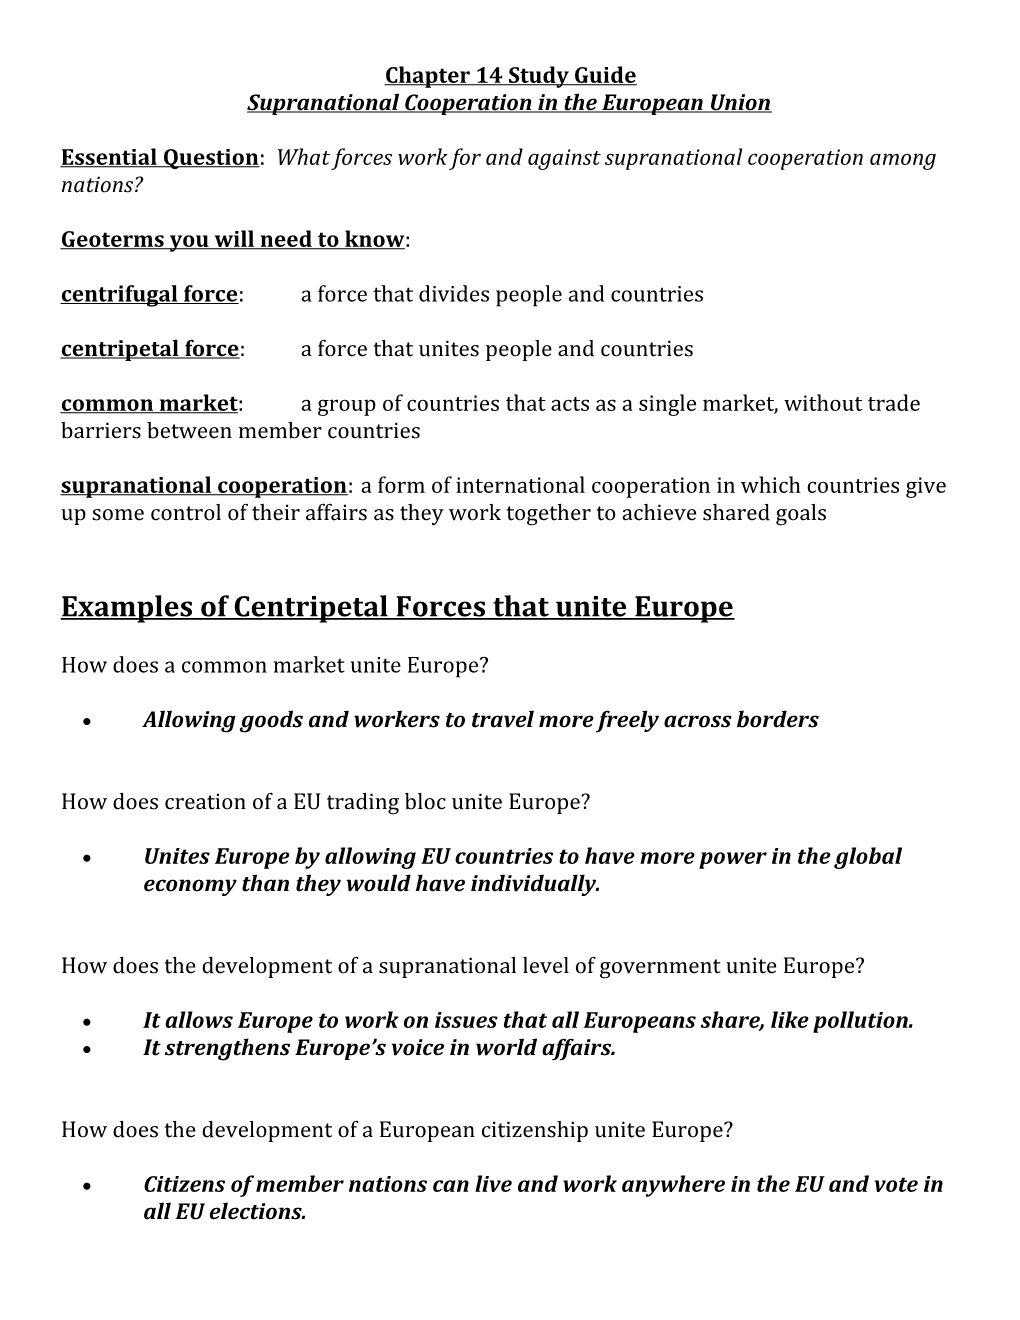 Supranational Cooperation in the European Union